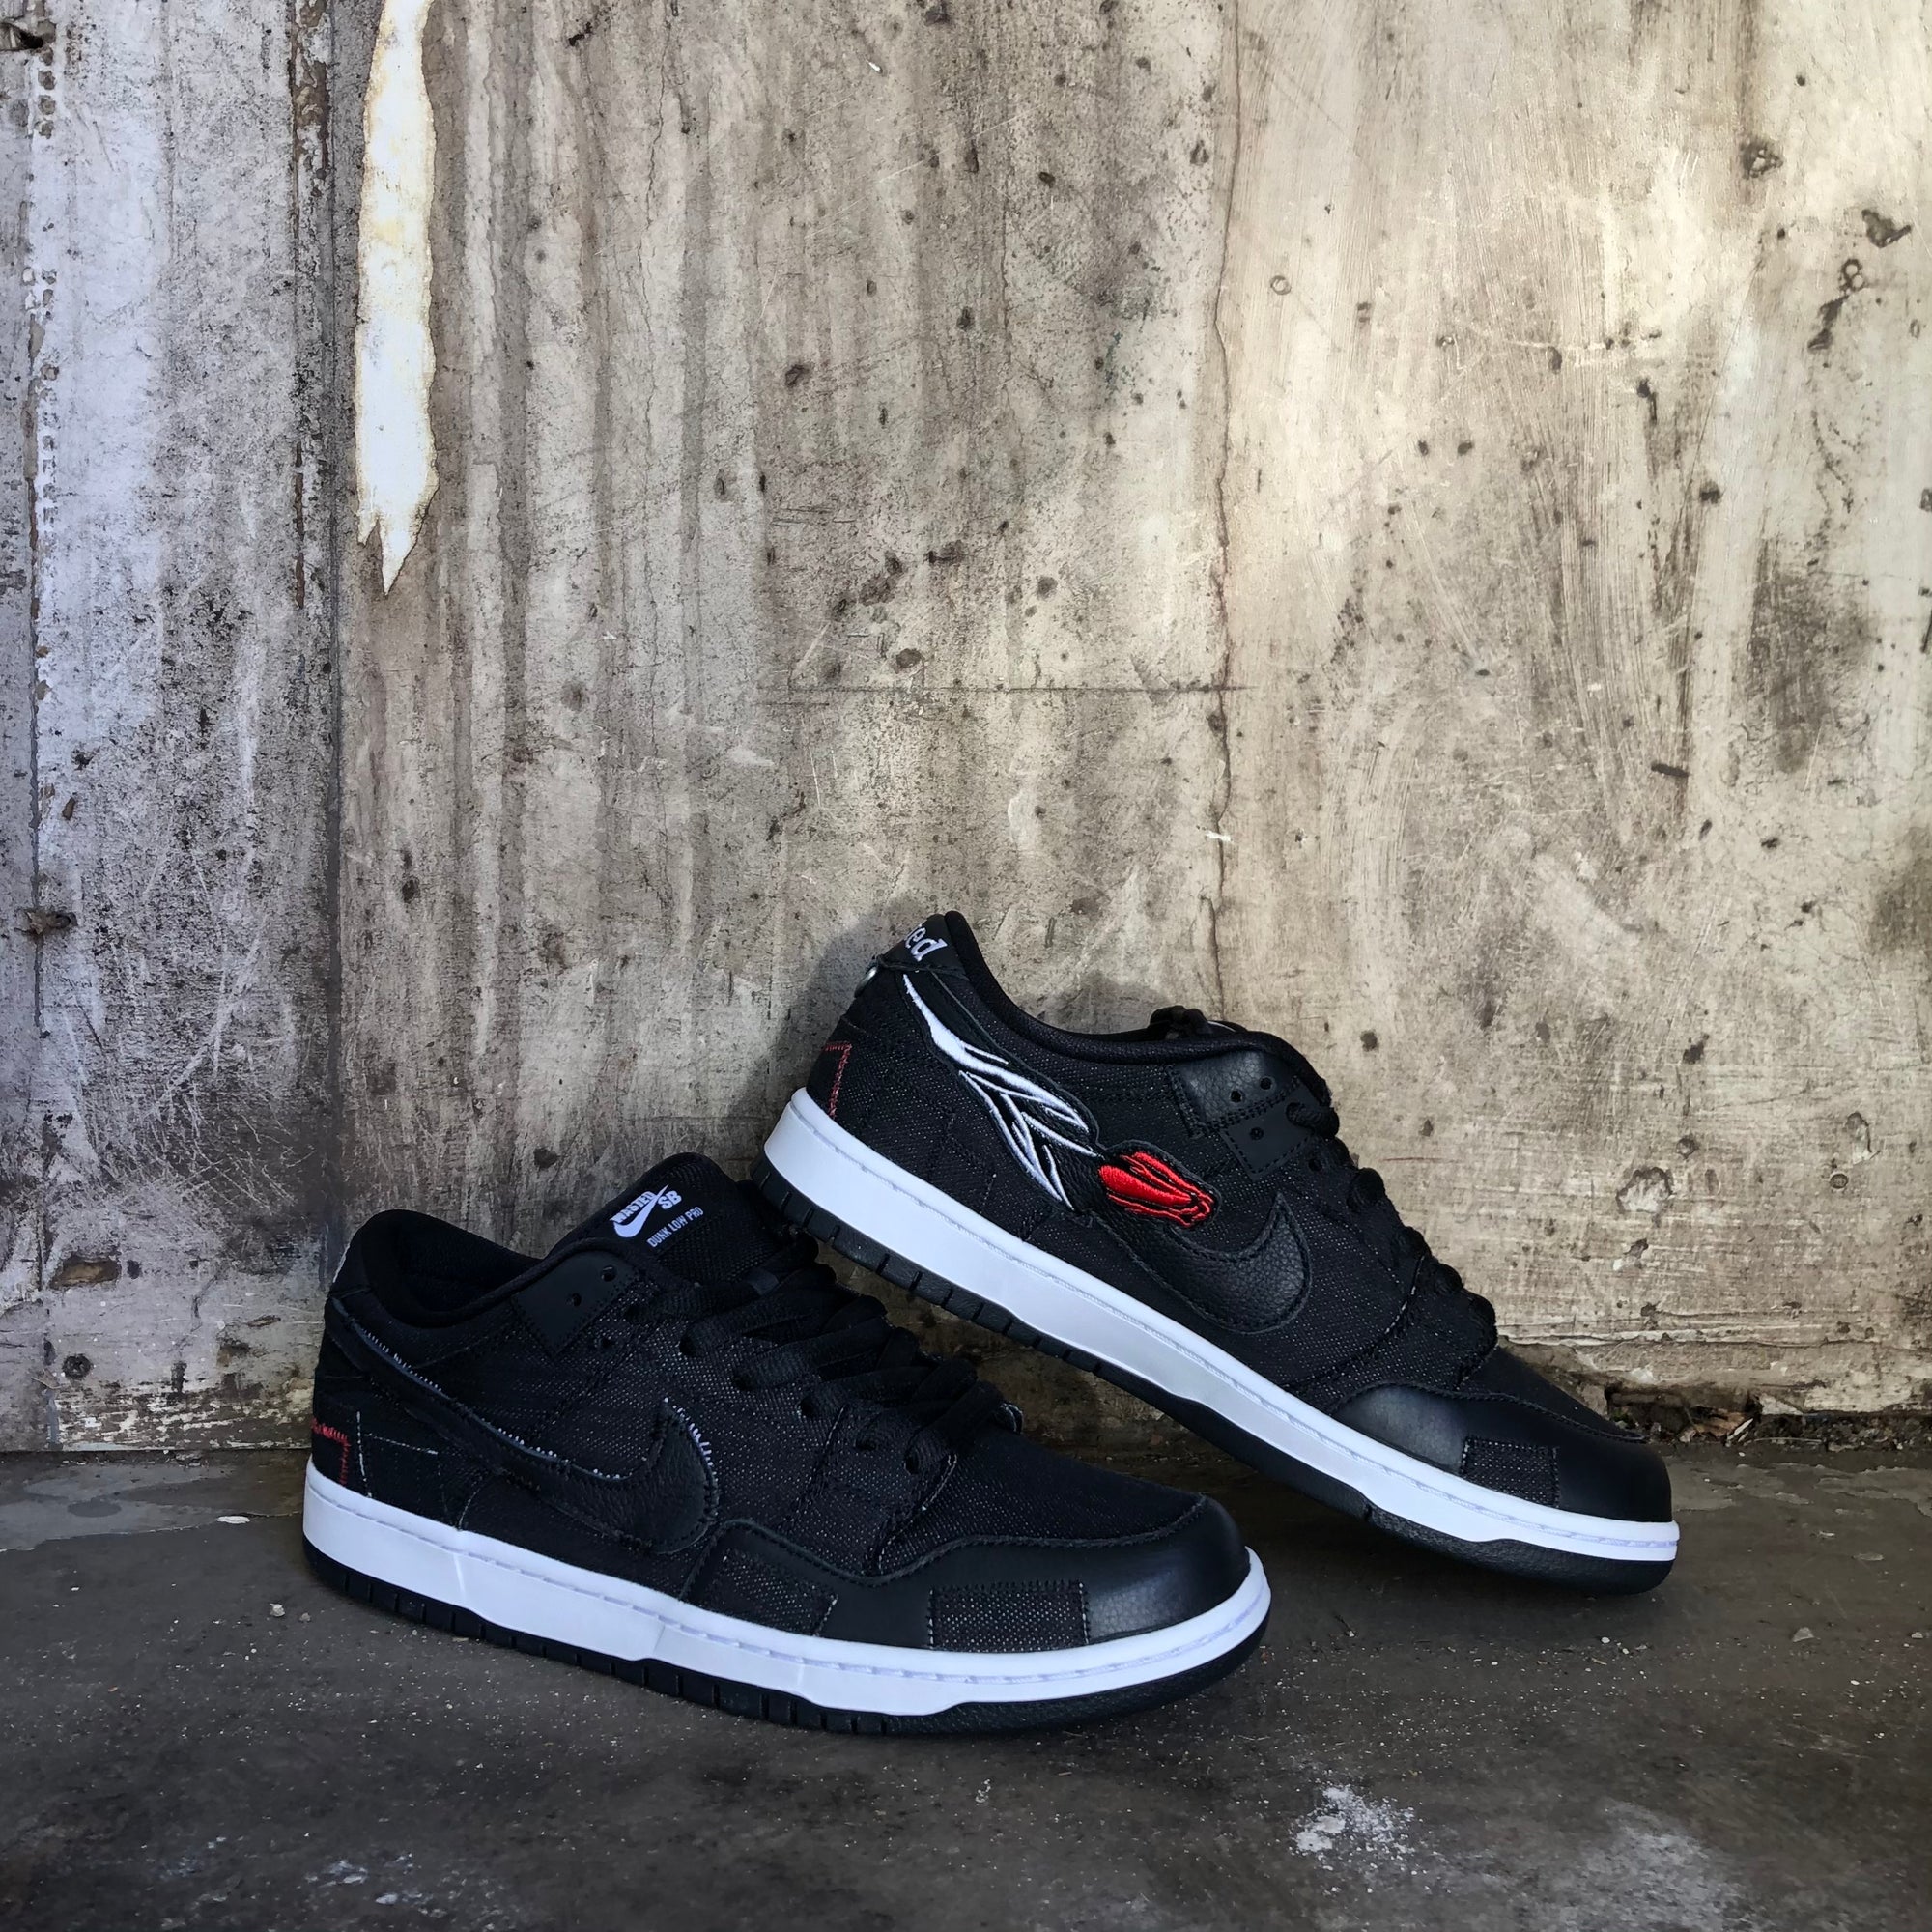 Nike SB Wasted Youth Dunk Low Raffle